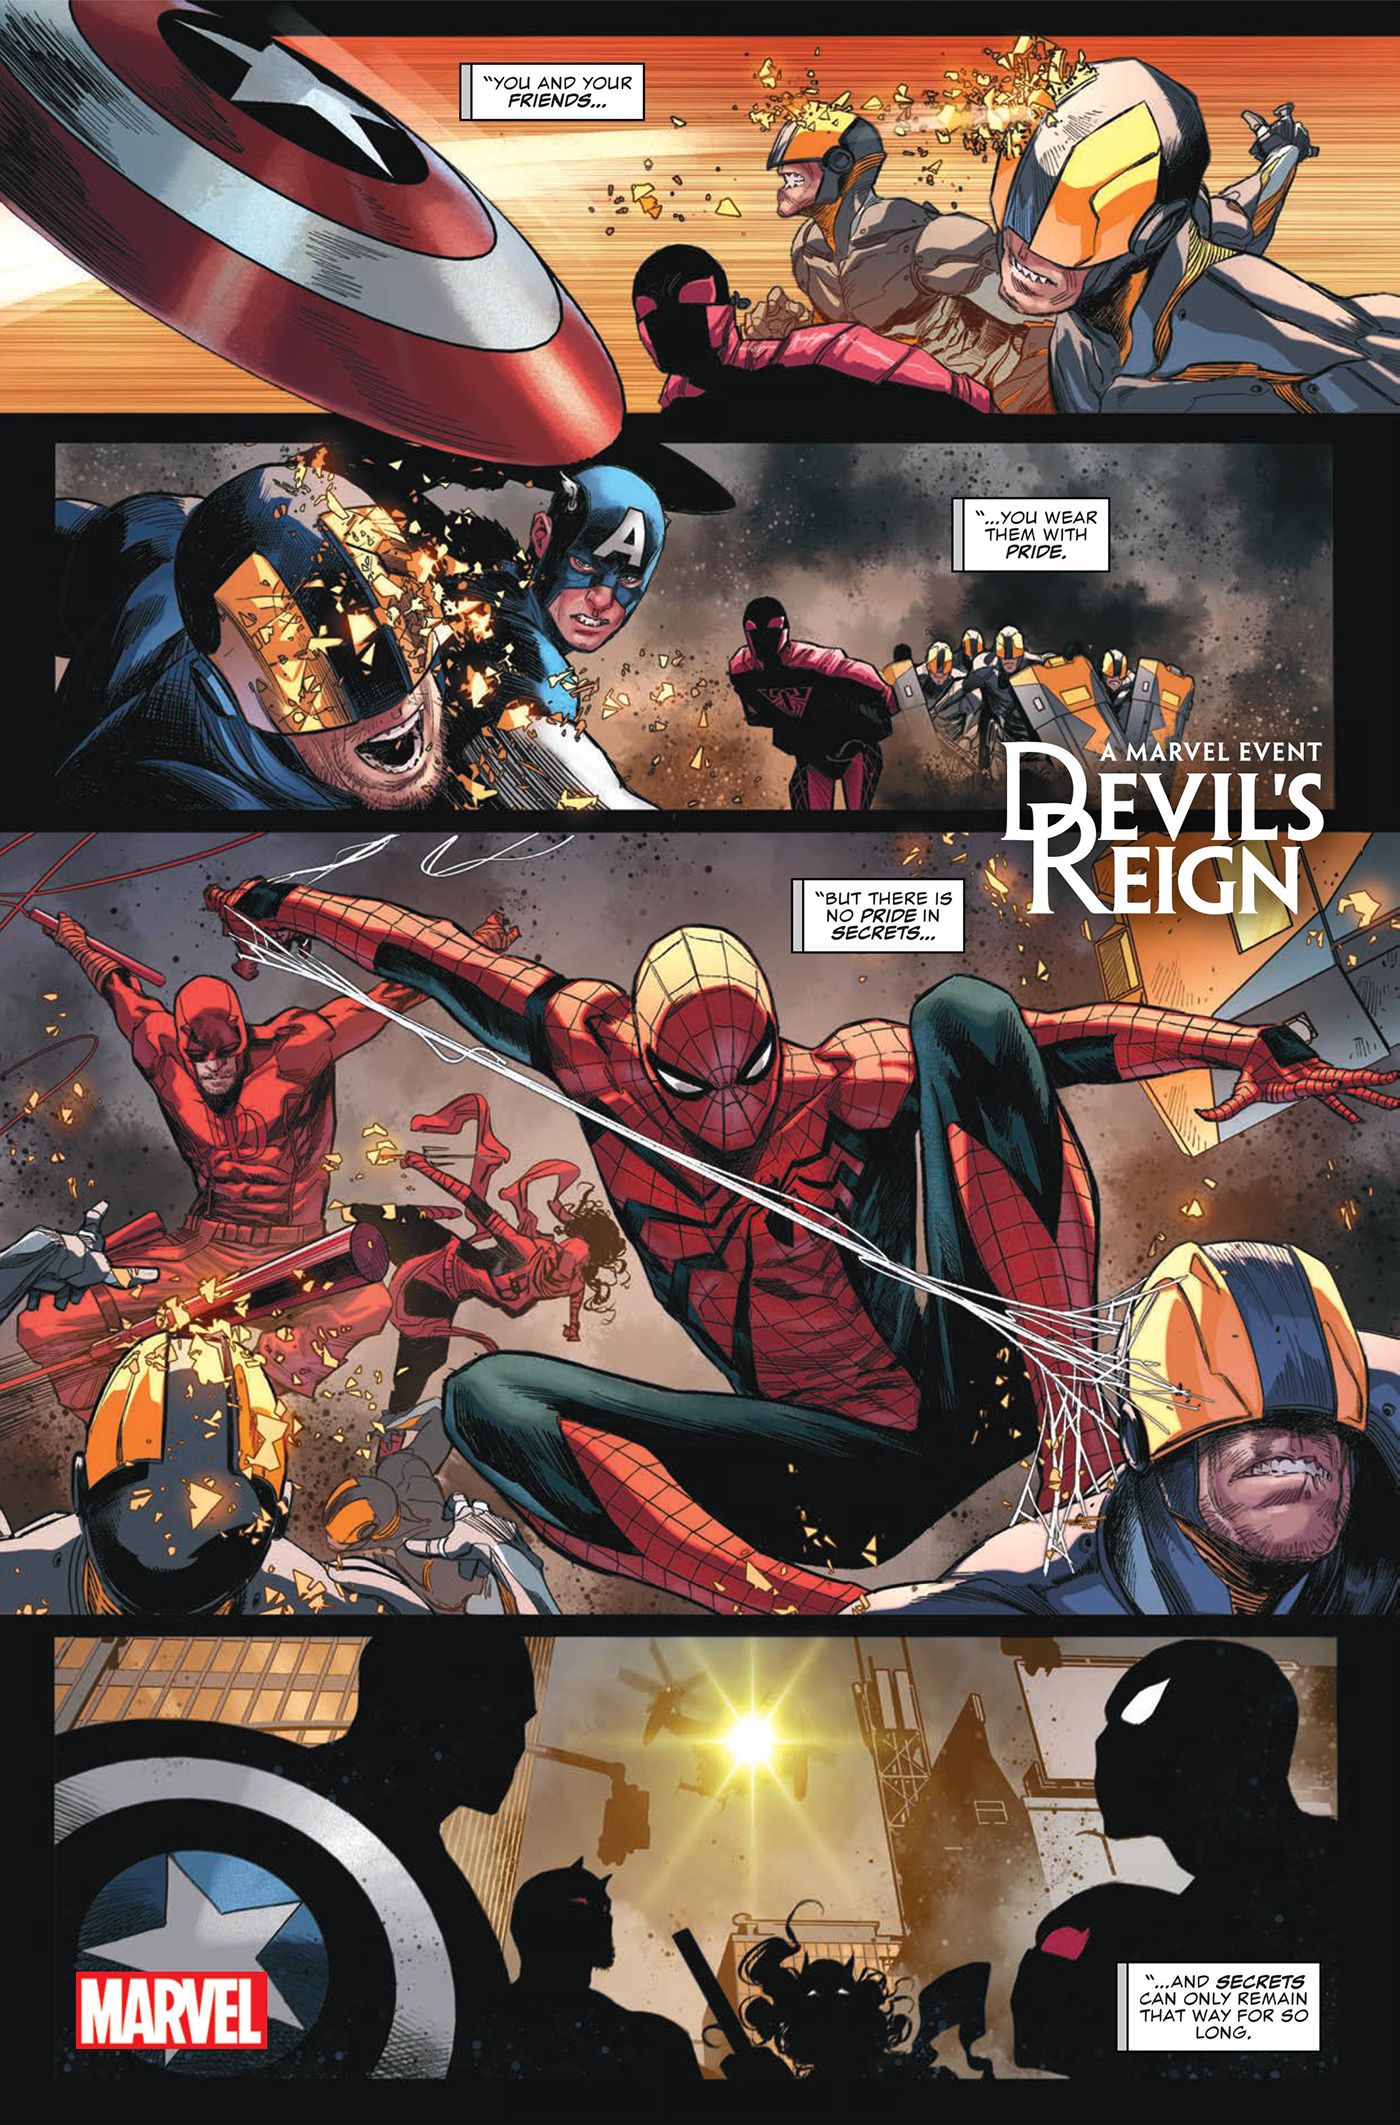 Captain America and the Daredevils save Spider-Man from being arrested.